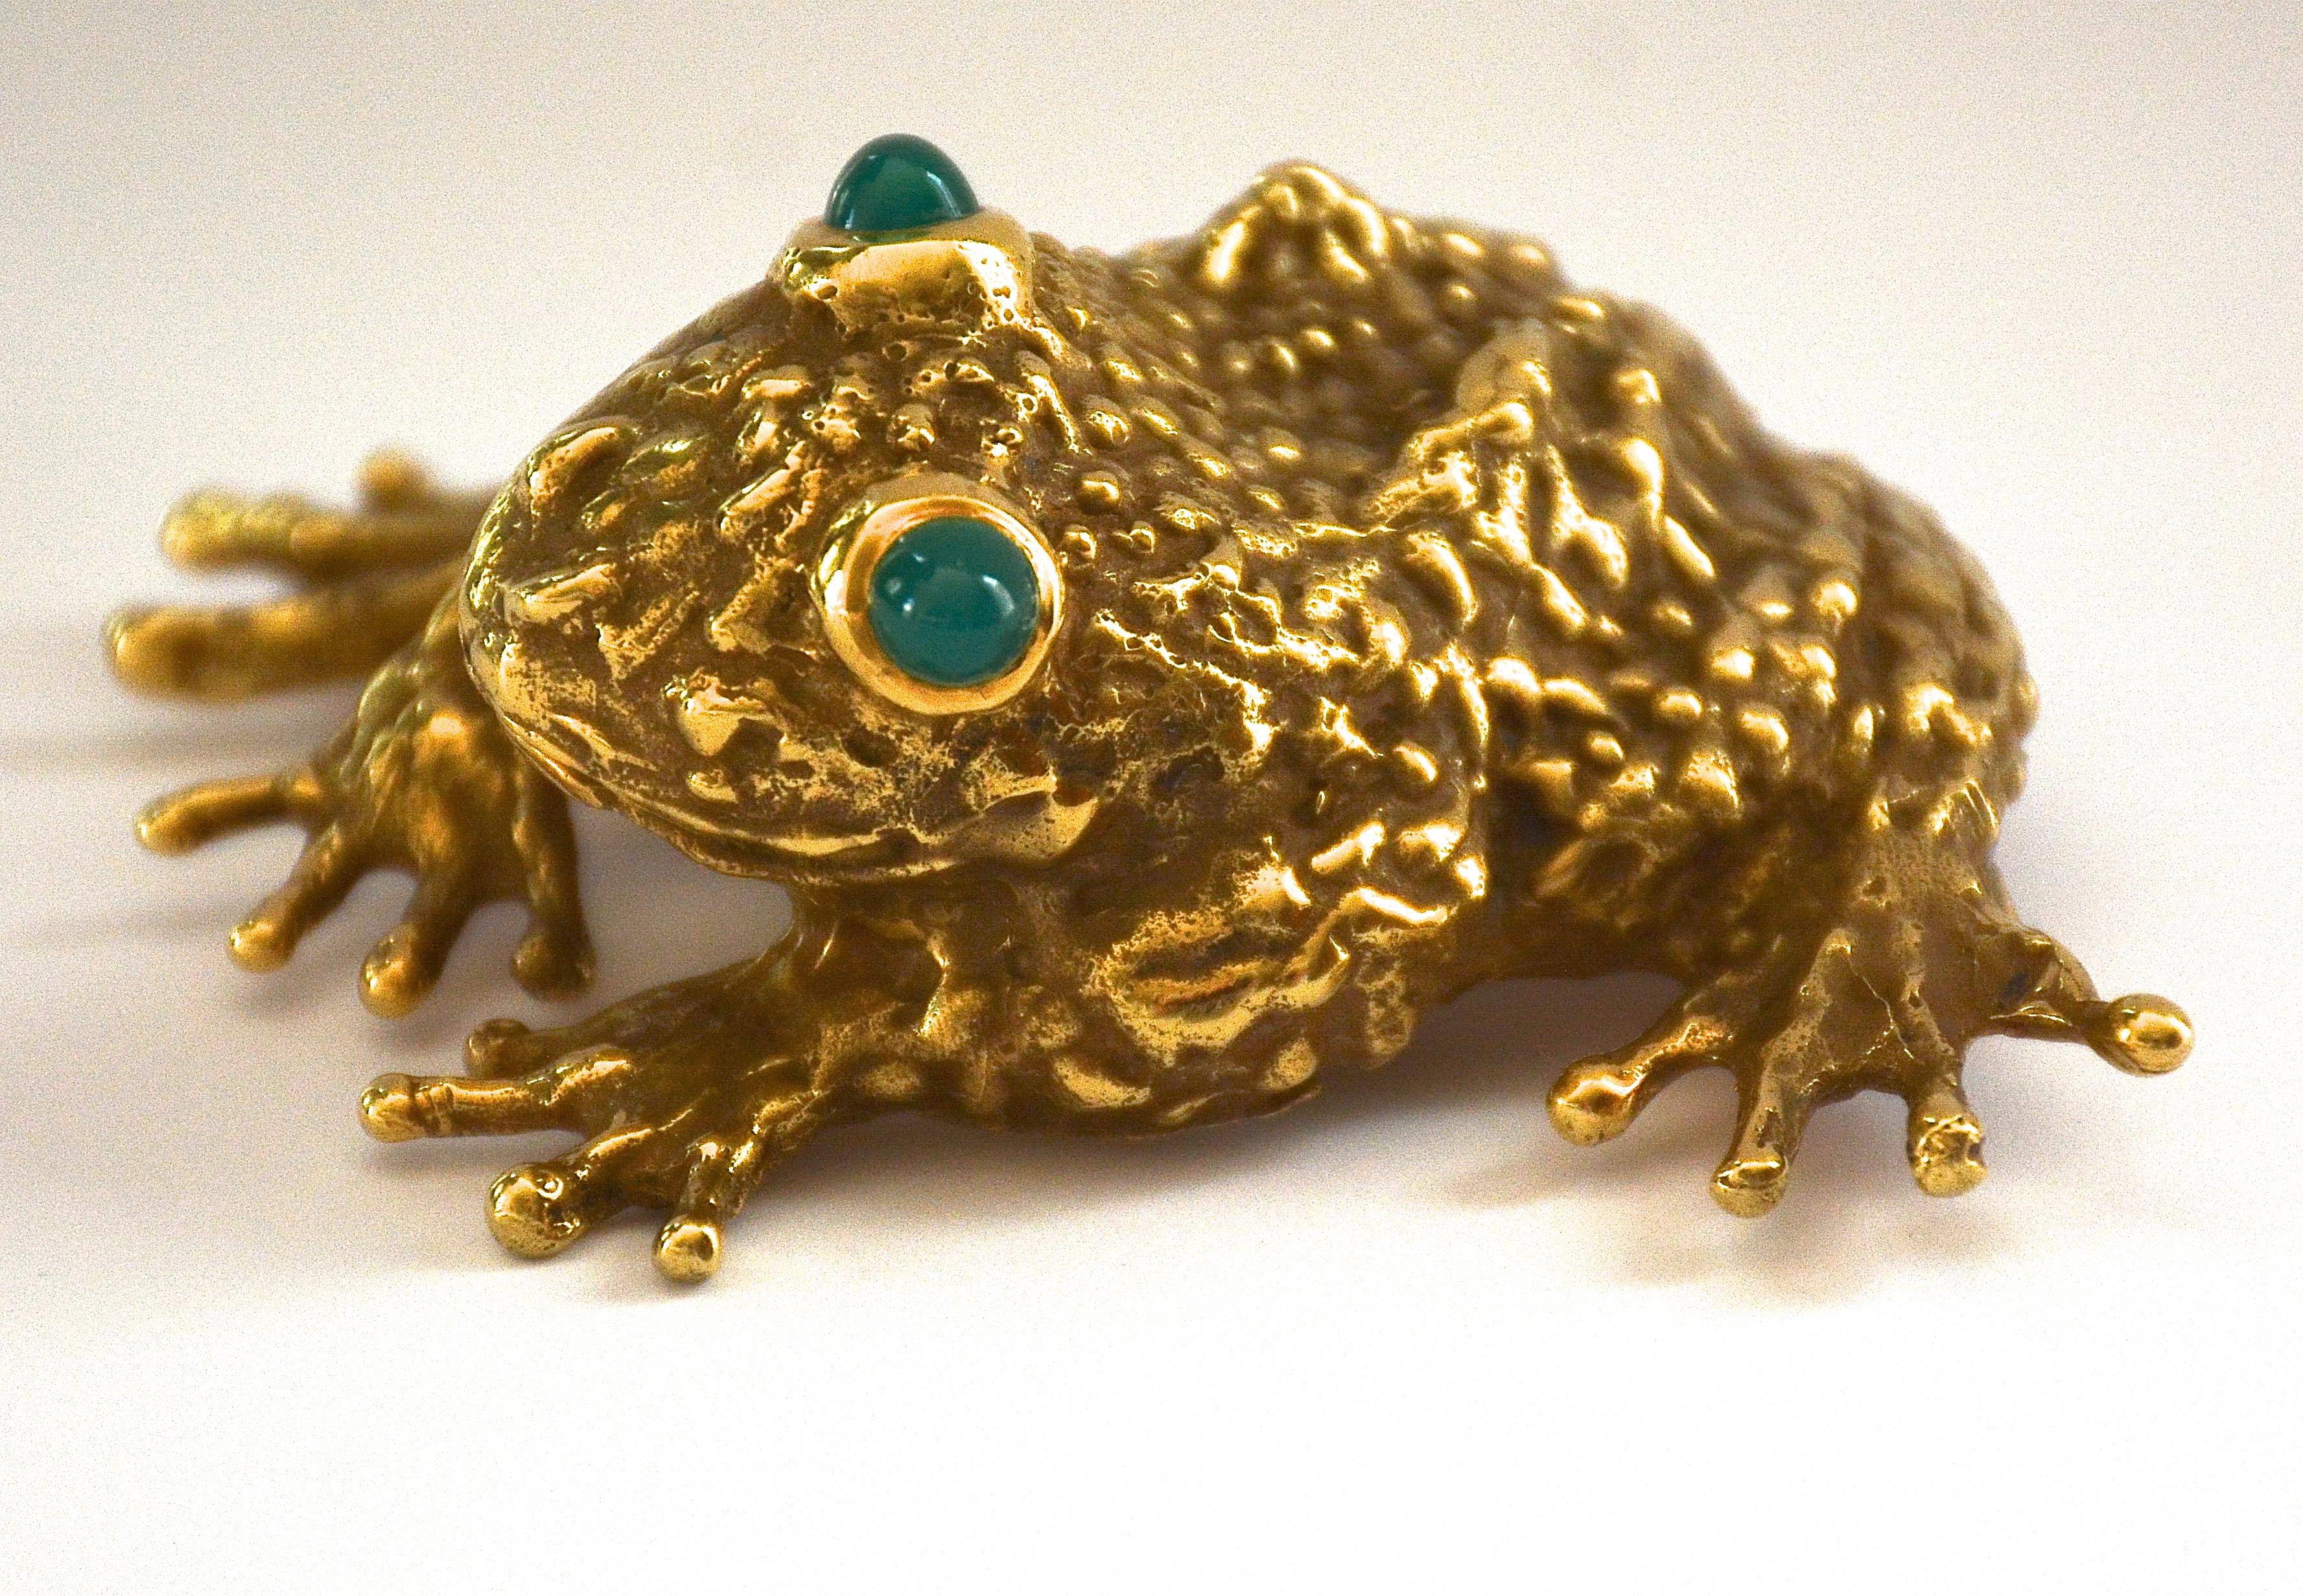 Cabochon Erwin Pearl 1980s Fine Jewelry 18k. Gold Frog Brooch Set with Chrysoprase Eyes